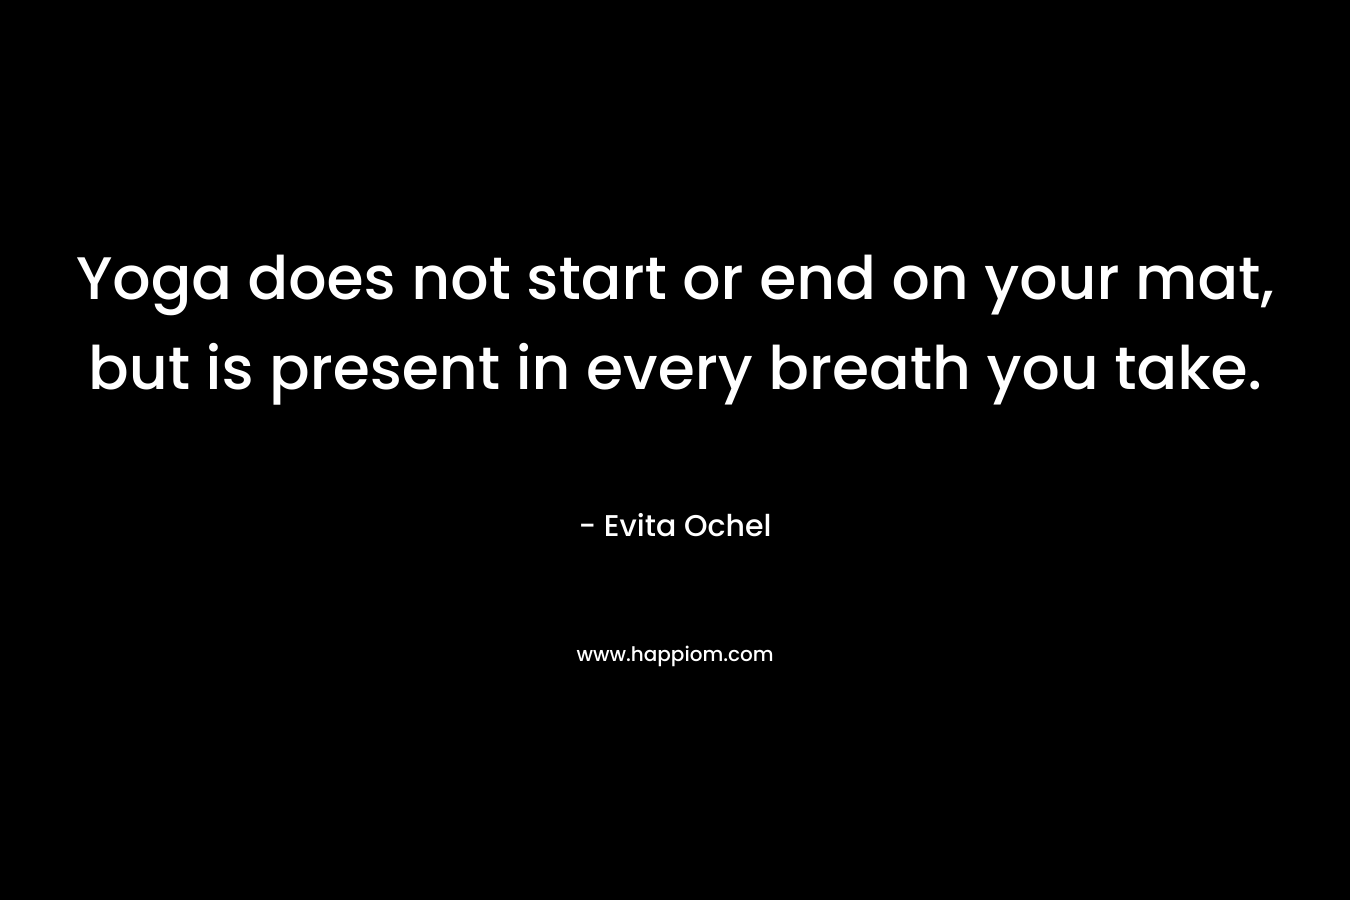 Yoga does not start or end on your mat, but is present in every breath you take. – Evita Ochel